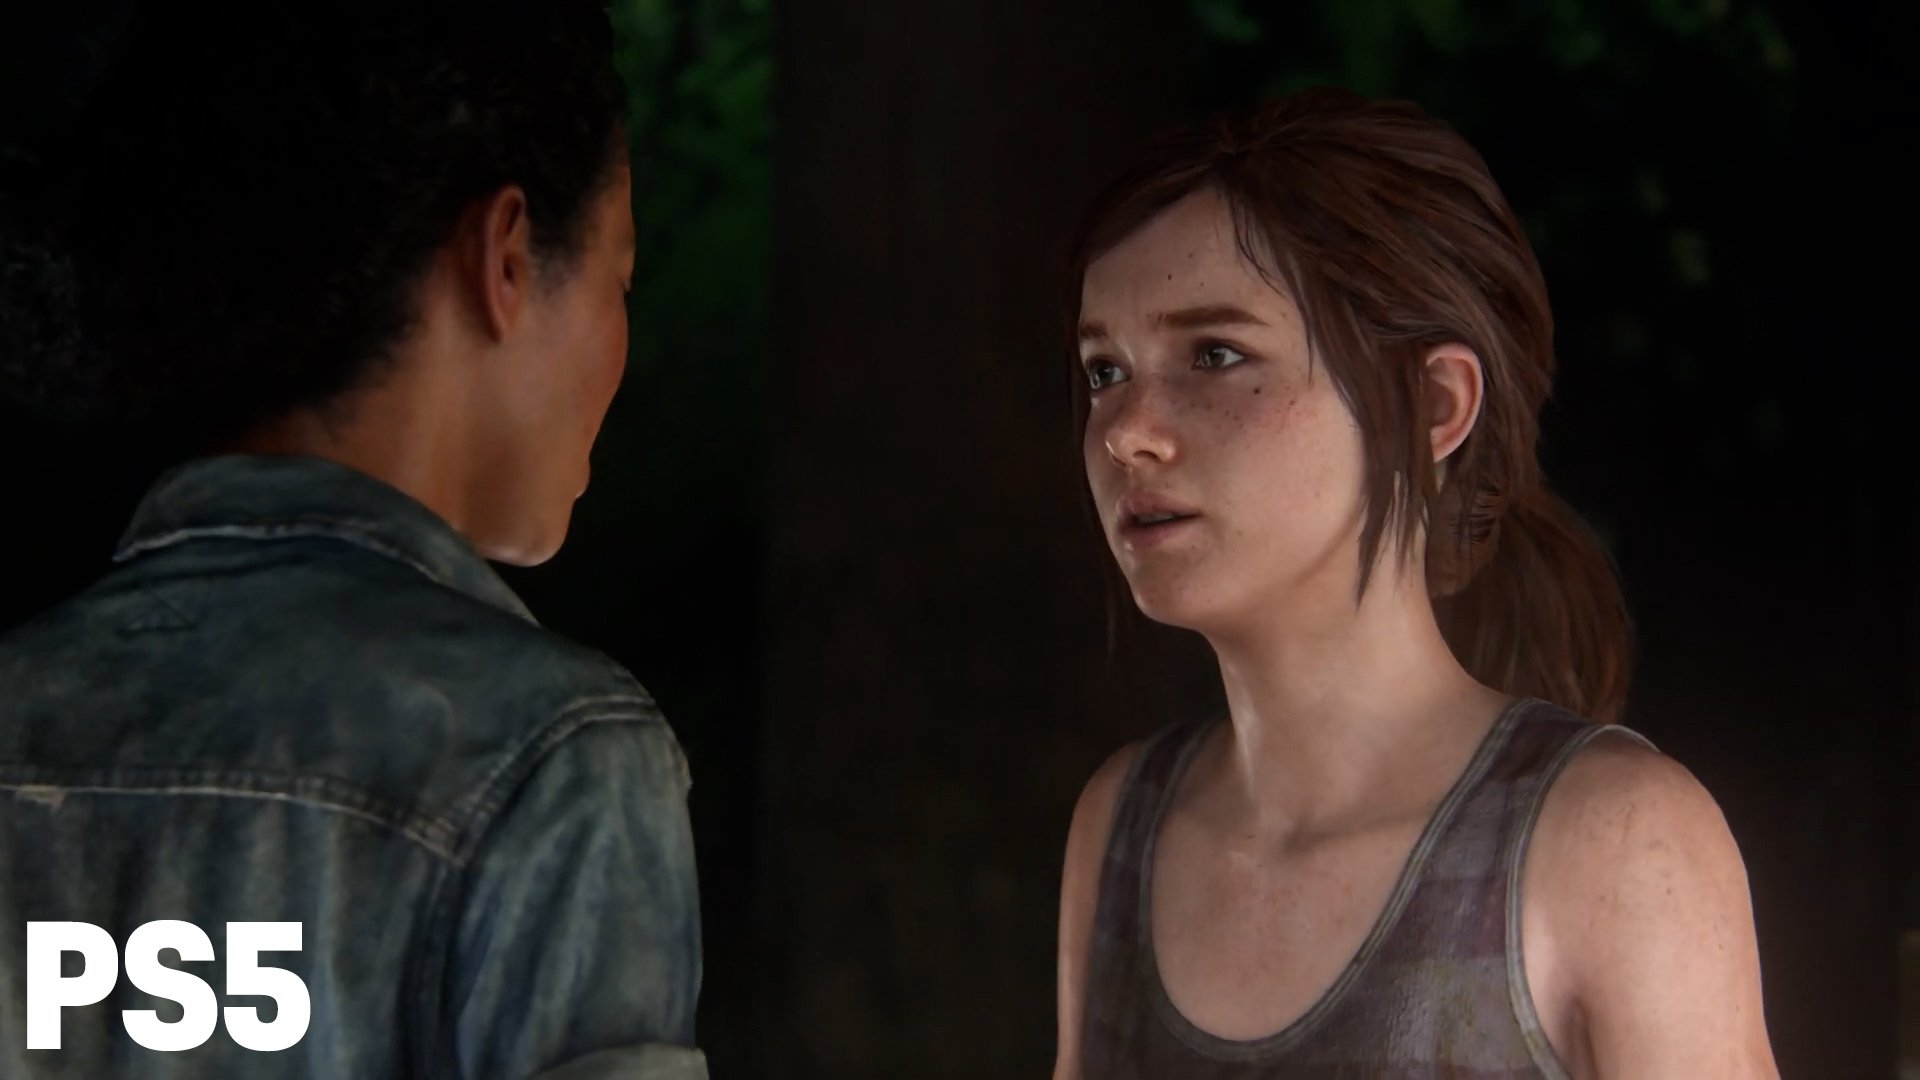 Will The Last of Us Remake Come to PS4 and PC?